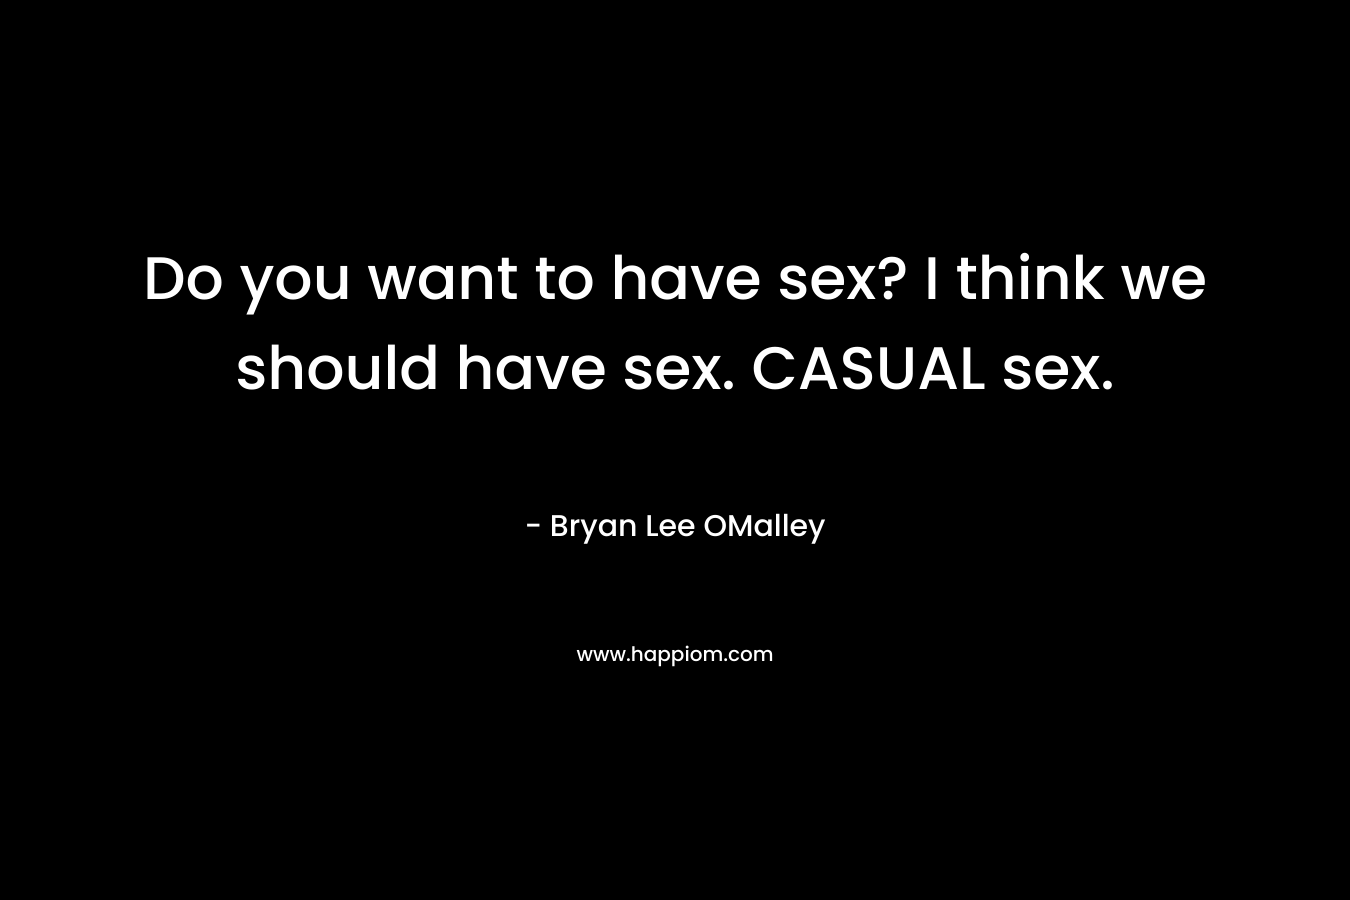 Do you want to have sex? I think we should have sex. CASUAL sex.